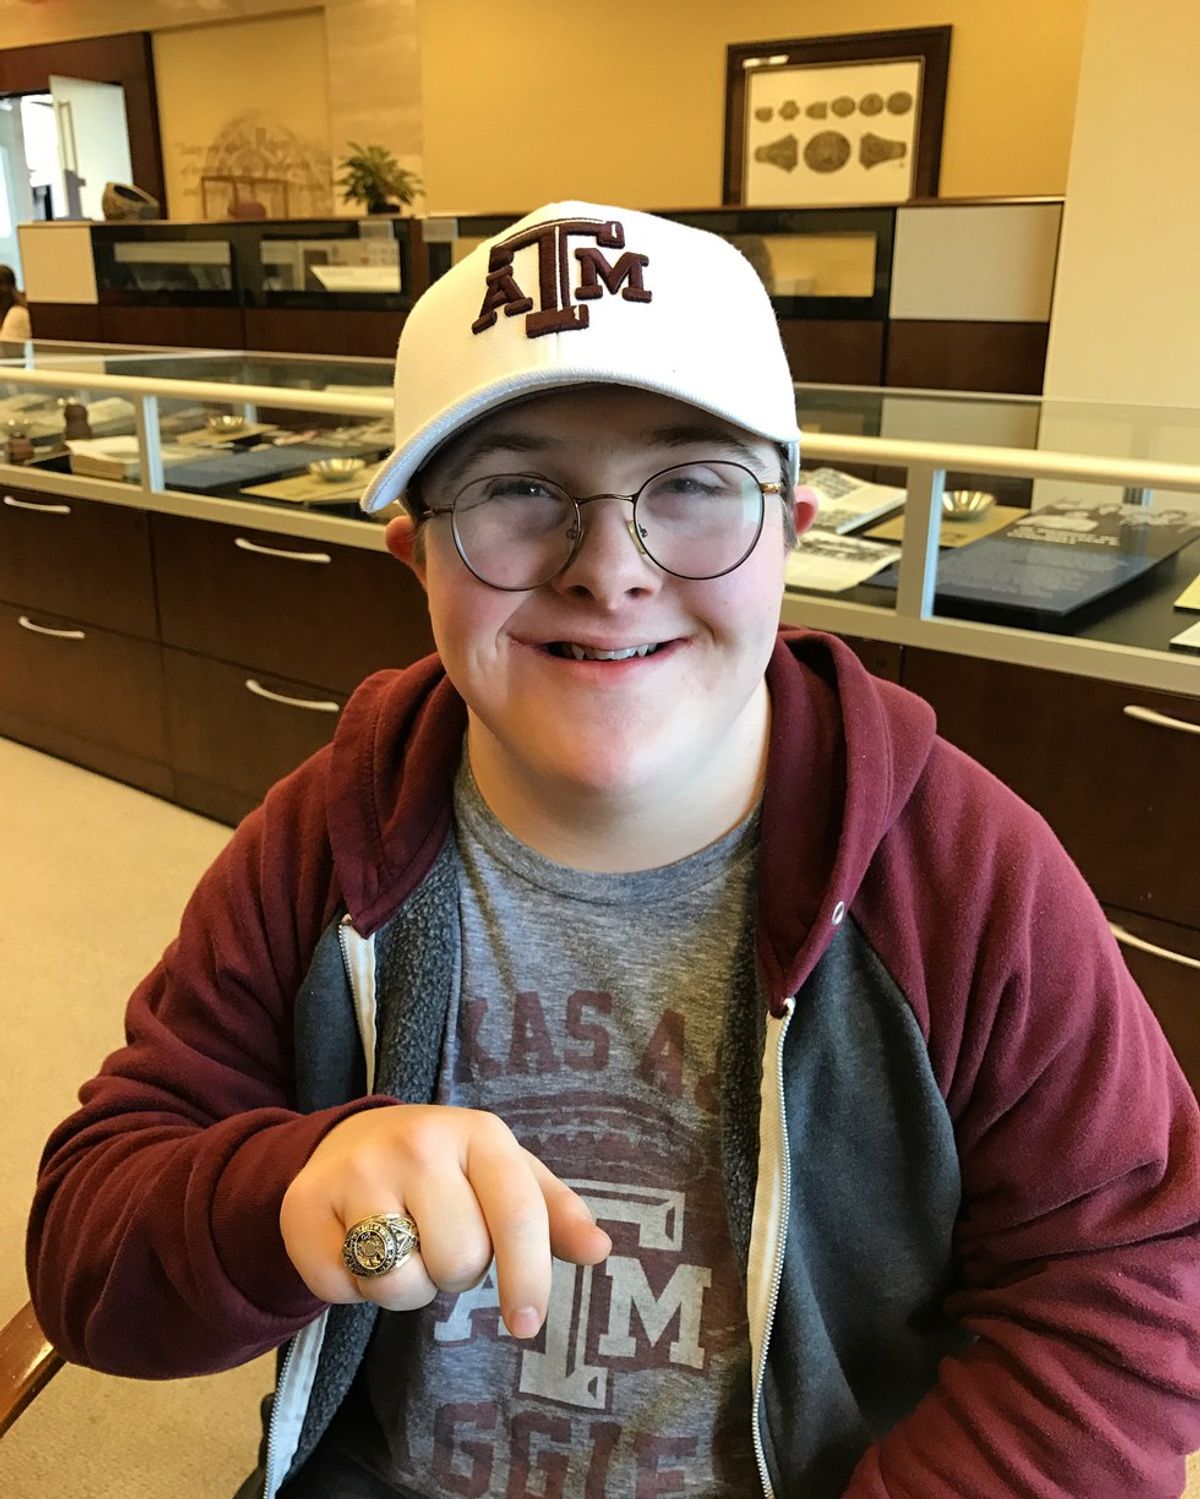 The Aggie Heart Ring